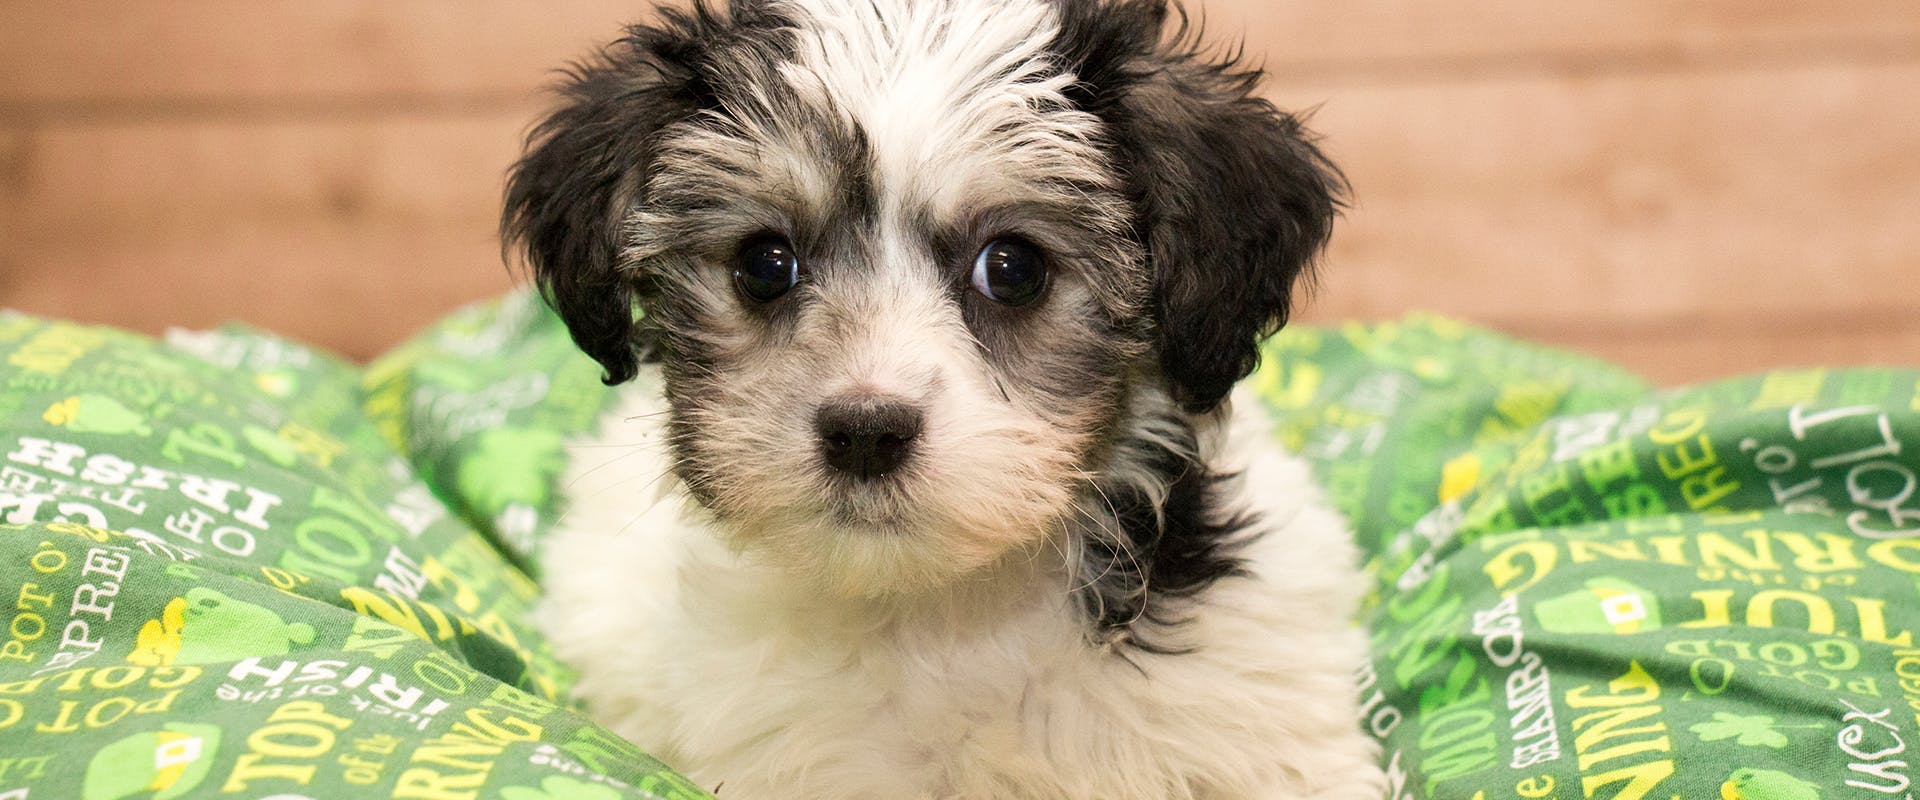 A small black and white Yorkiepoo puppy sitting on a bright green blanket